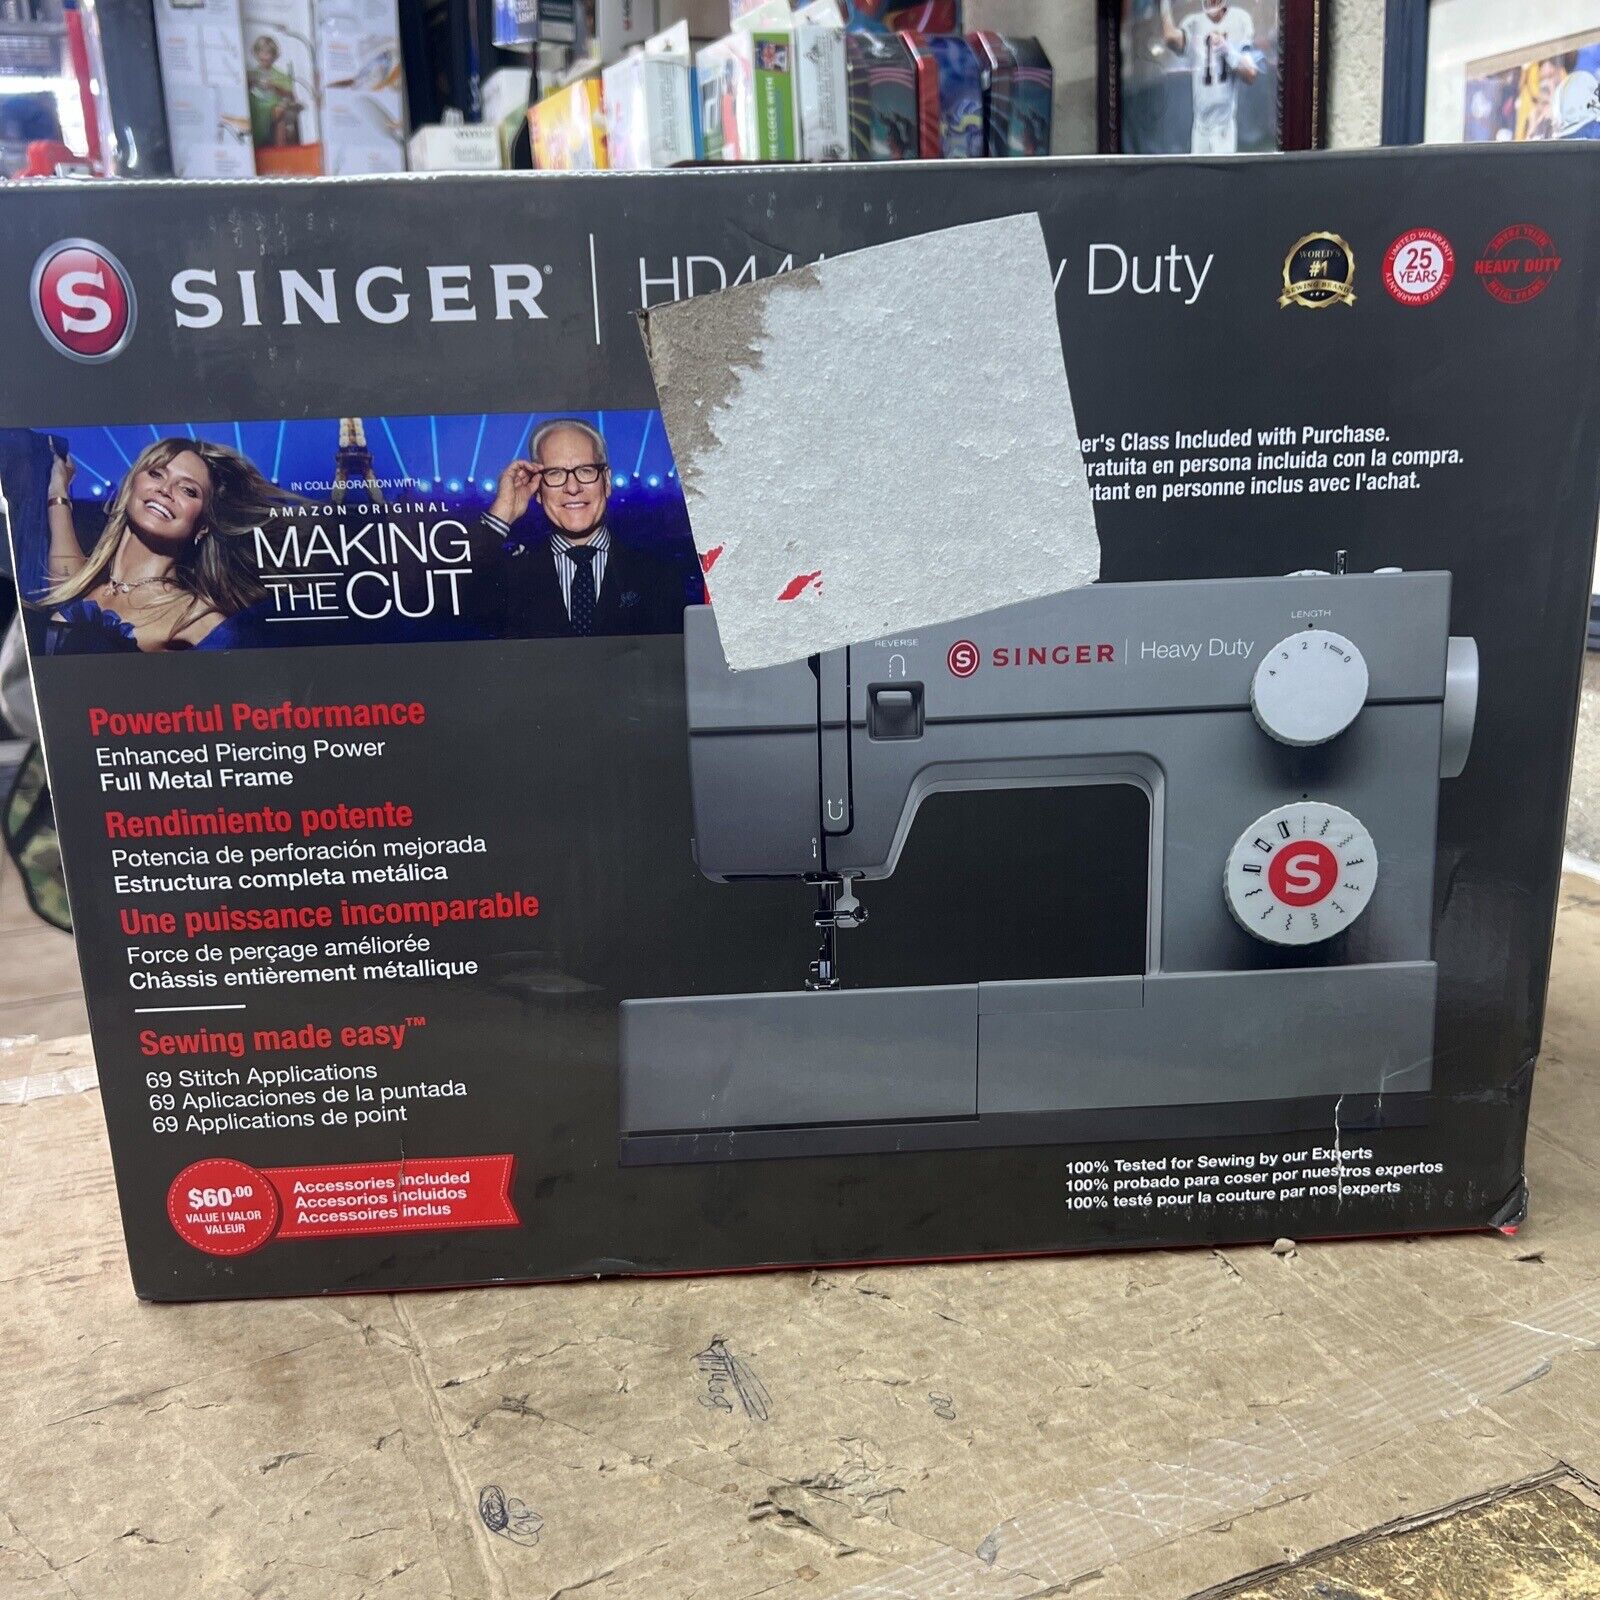 SINGER 4411.CL Mechanical Sewing Machine for sale online